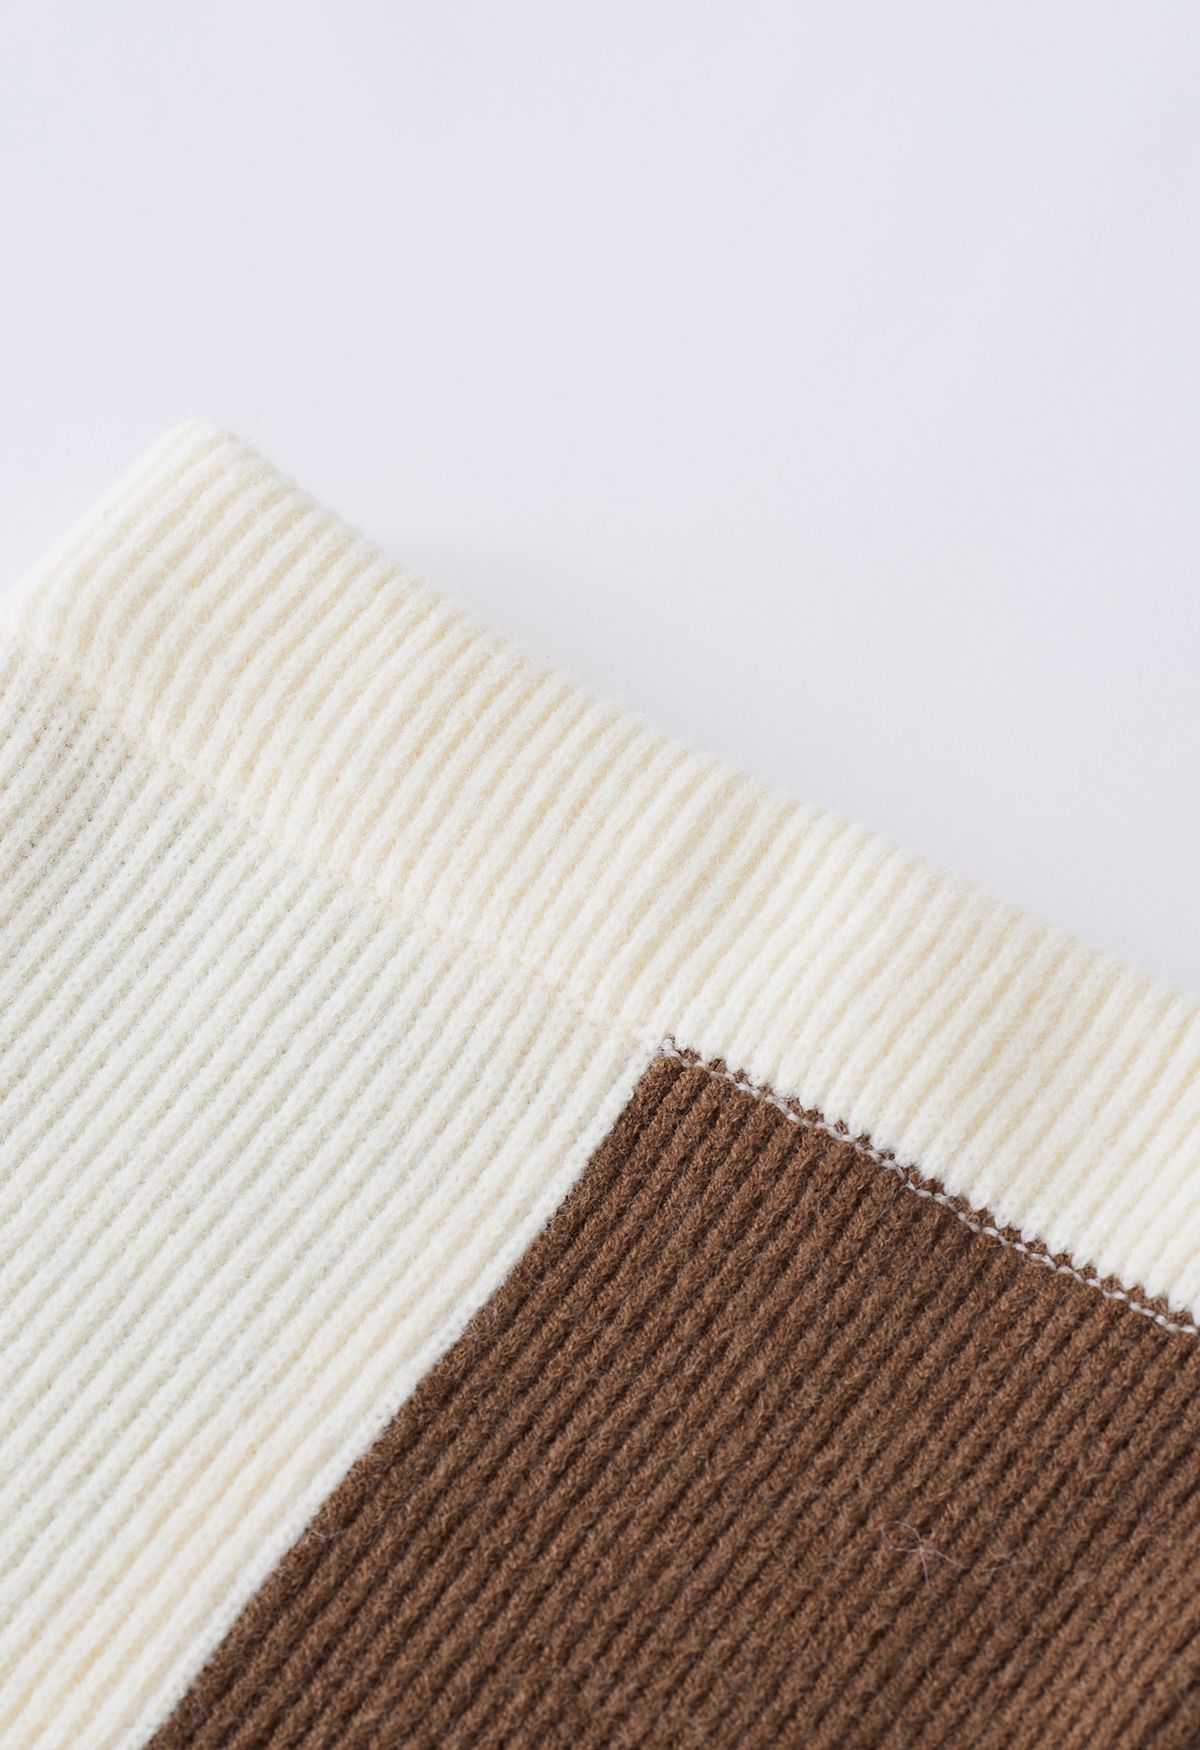 Bicolor Ribbed Knit Oversized Sweater and Pencil Skirt Set in Brown